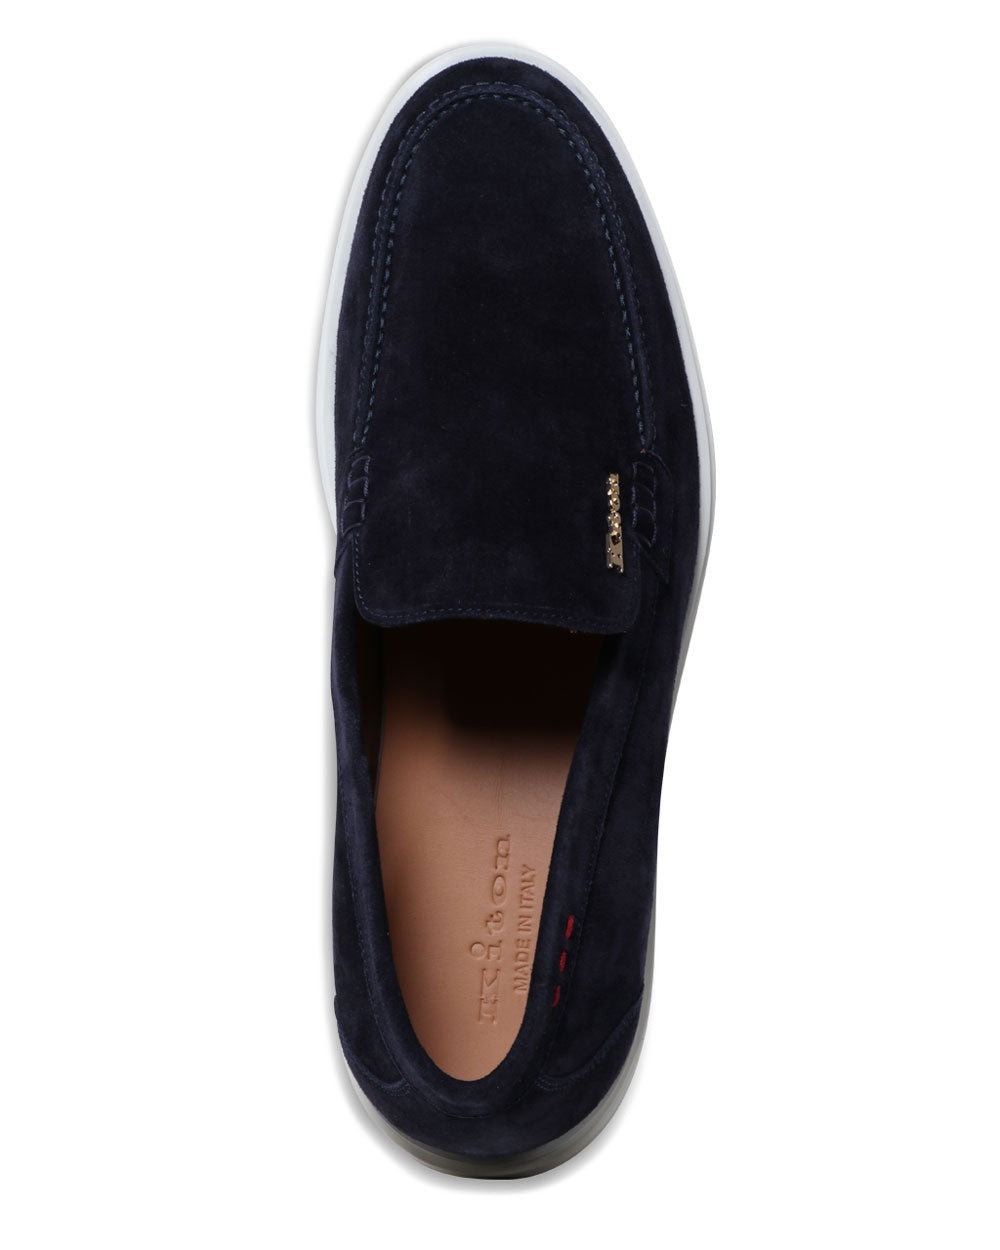 Suede Causal Loafer in Navy